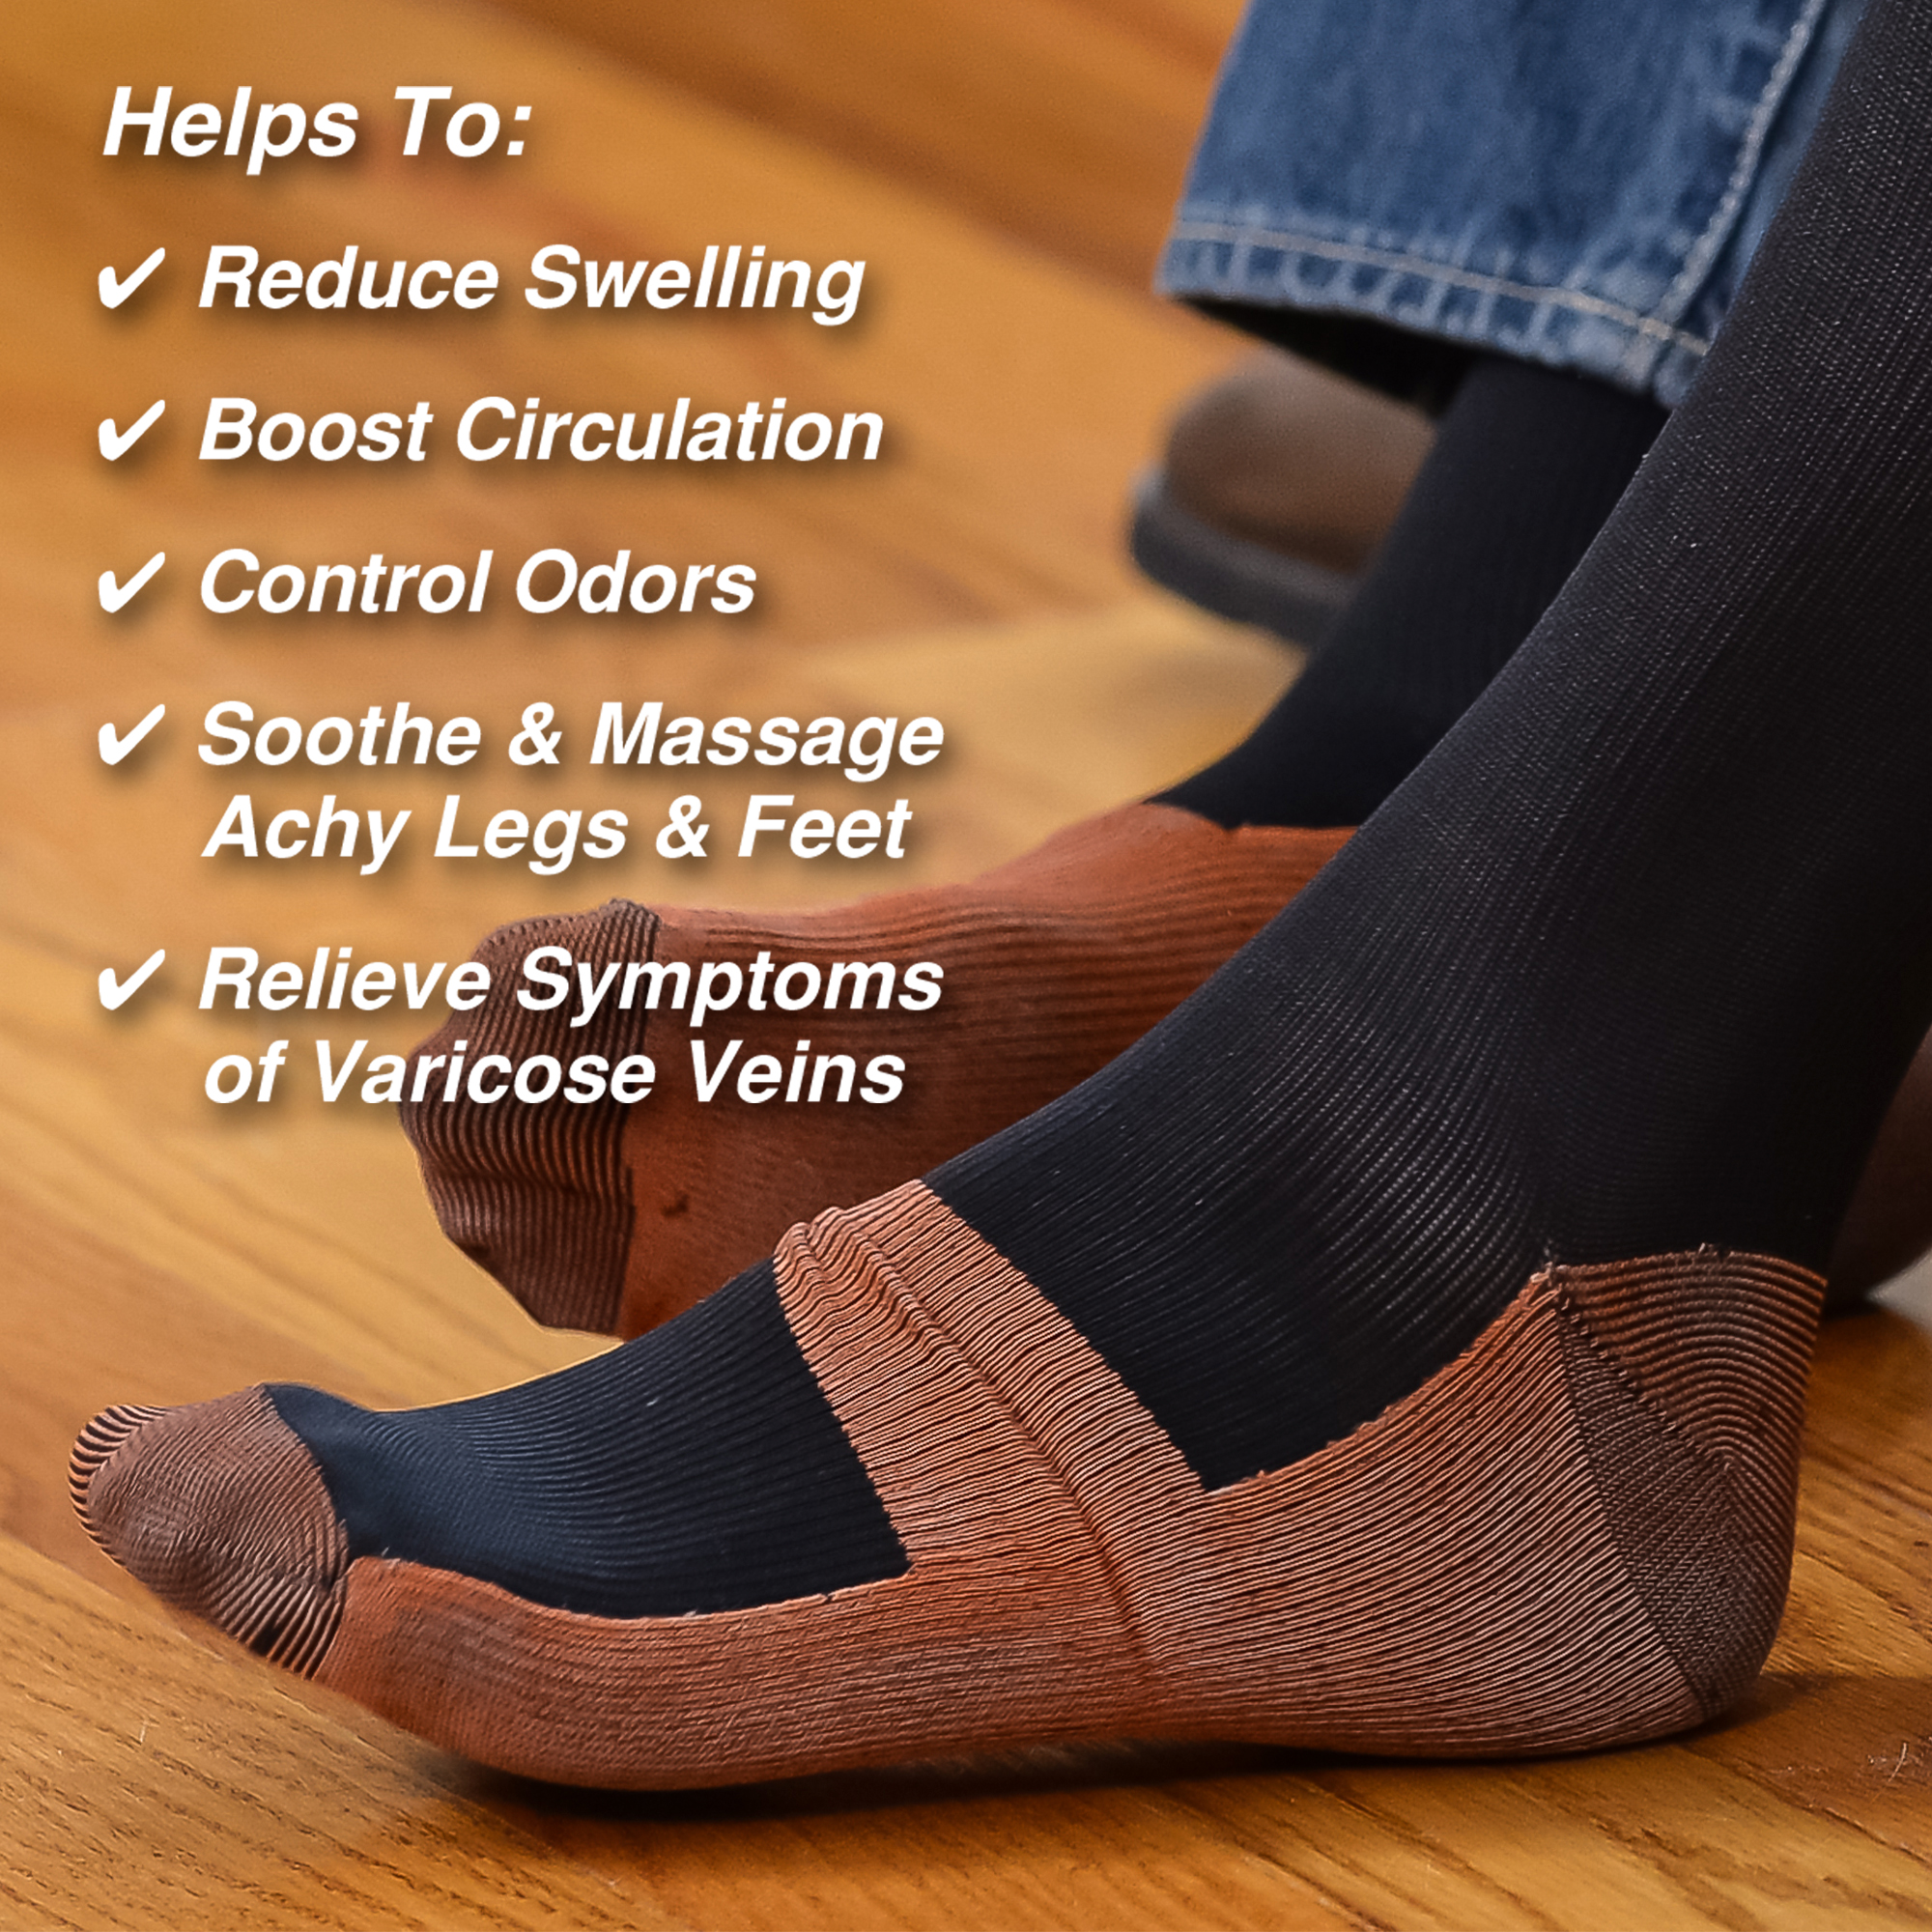 Miracle Copper Anti-Fatigue Copper Infused Compression Socks, Choose Your Size Unisex, As Seen on TV - image 5 of 6